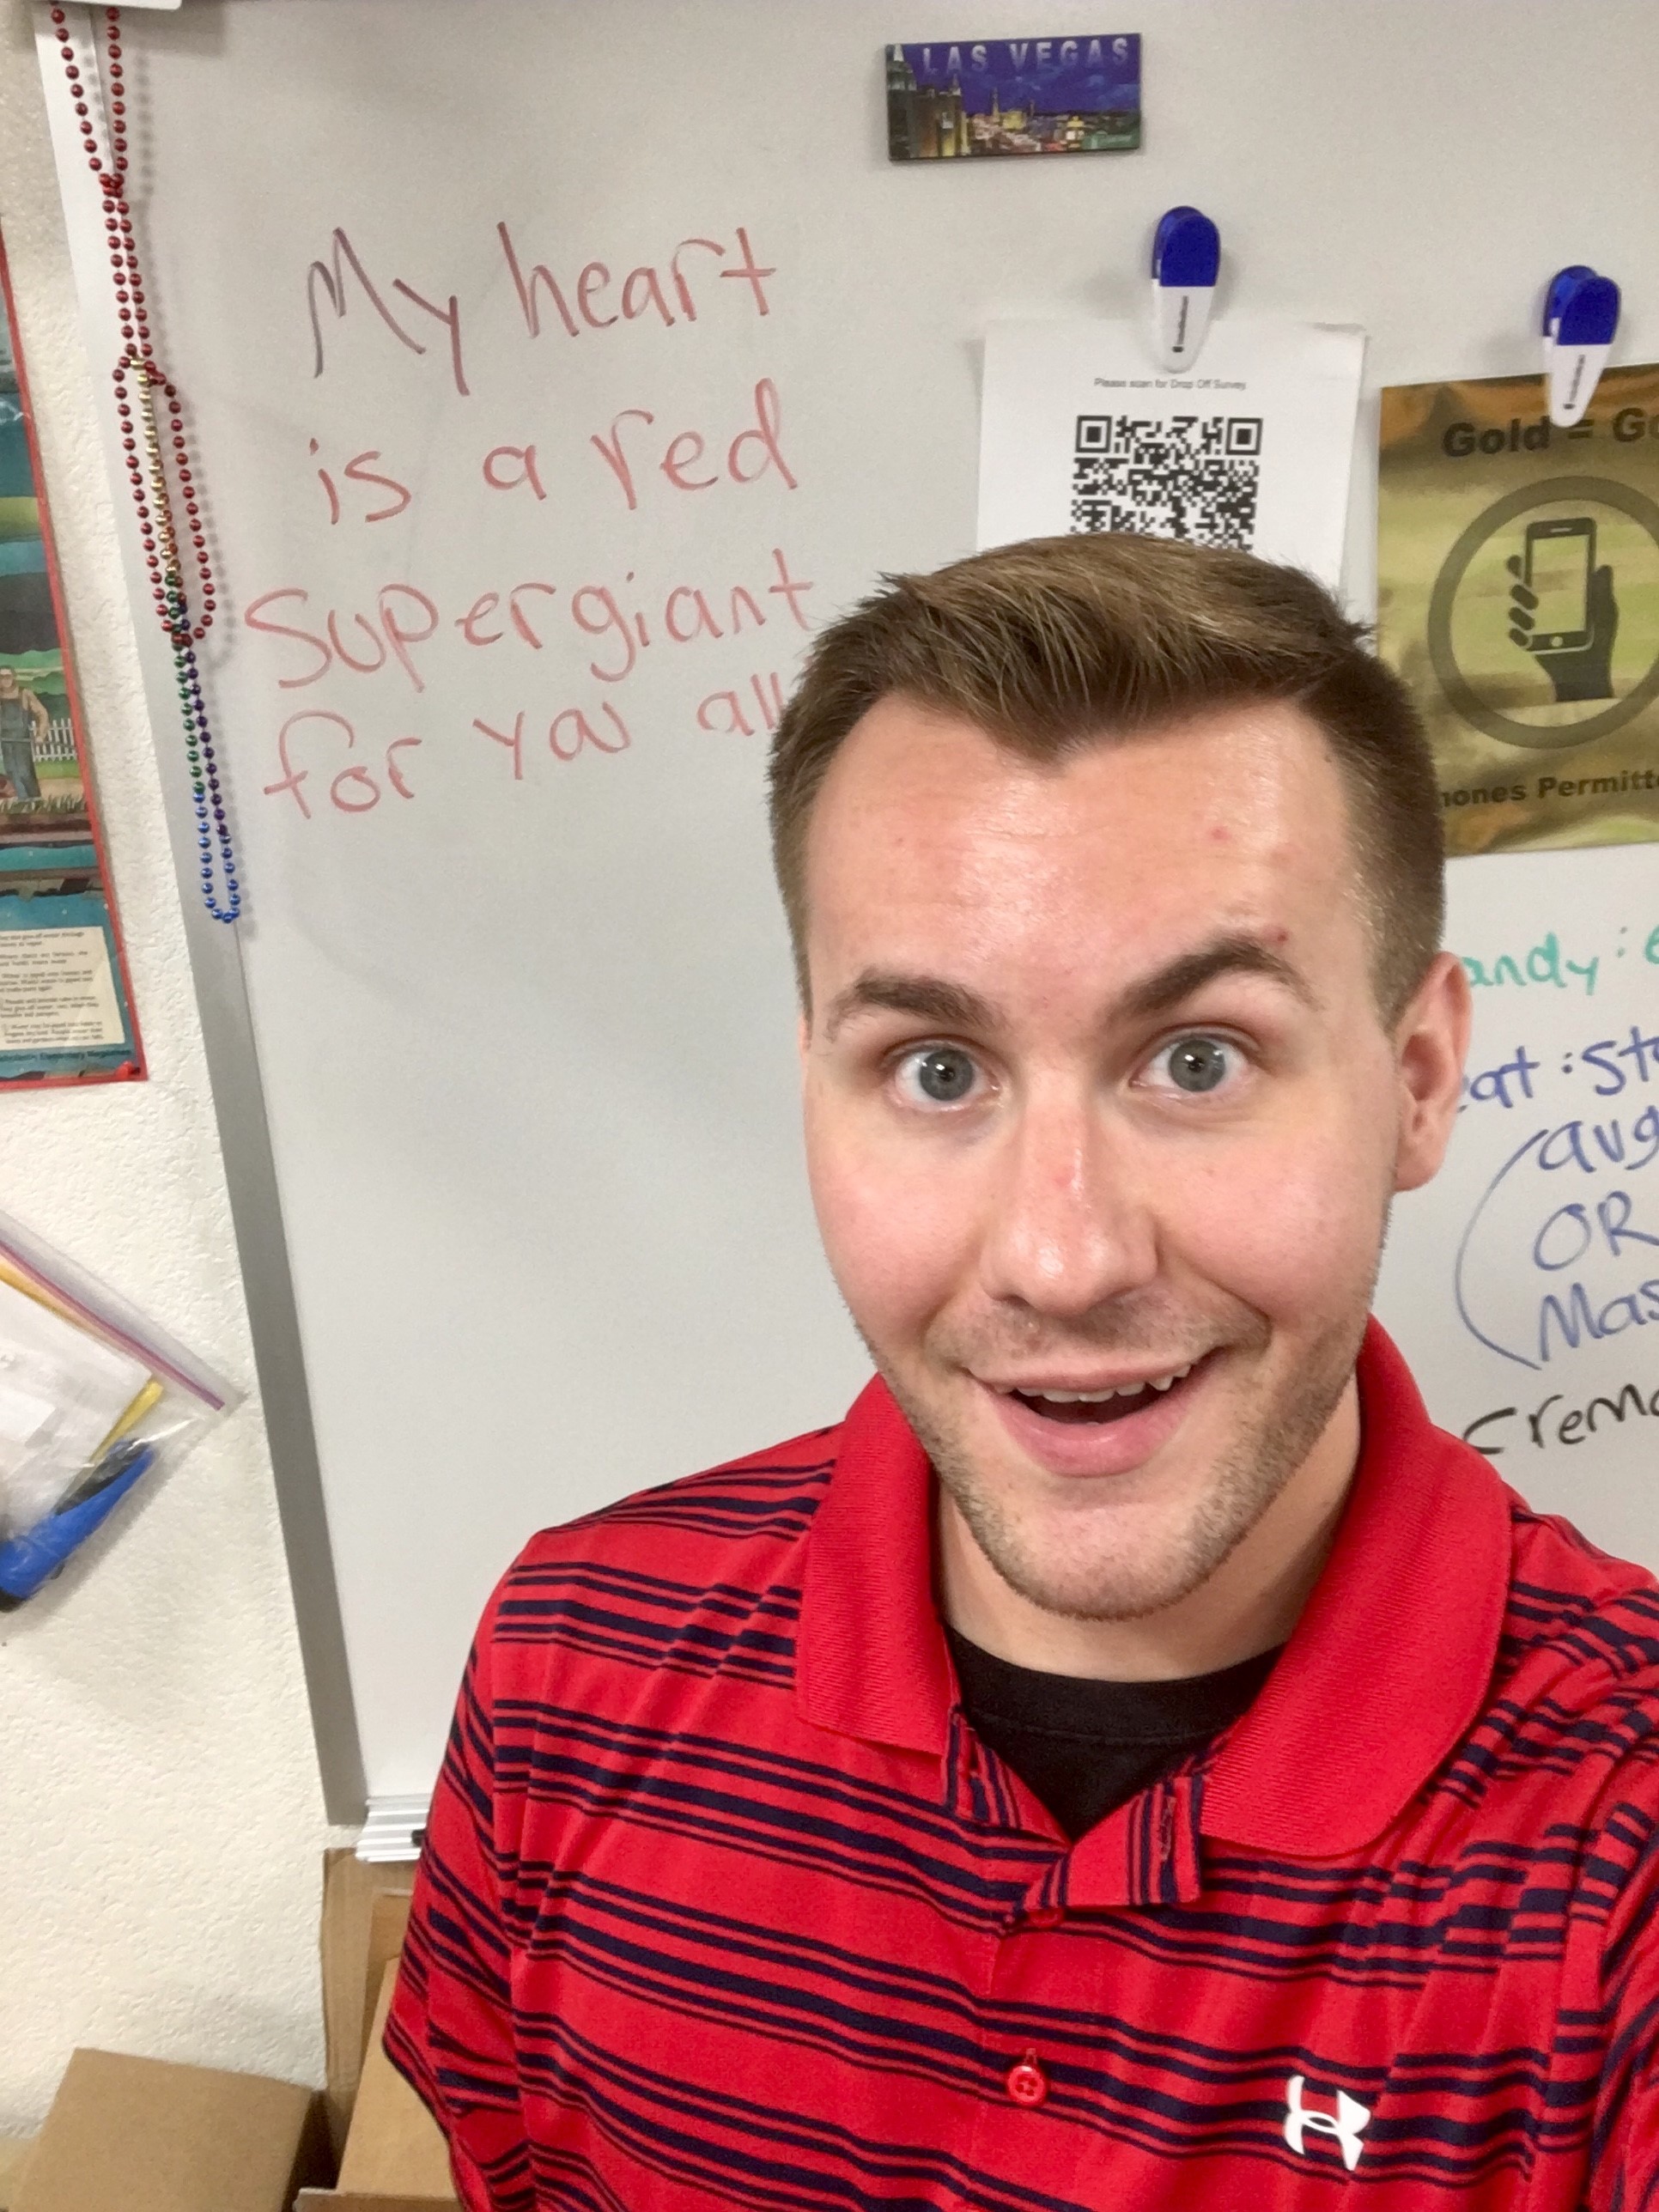 PHOTO: Nick Orr, a high school science teacher, poses in his classroom in Nevada.